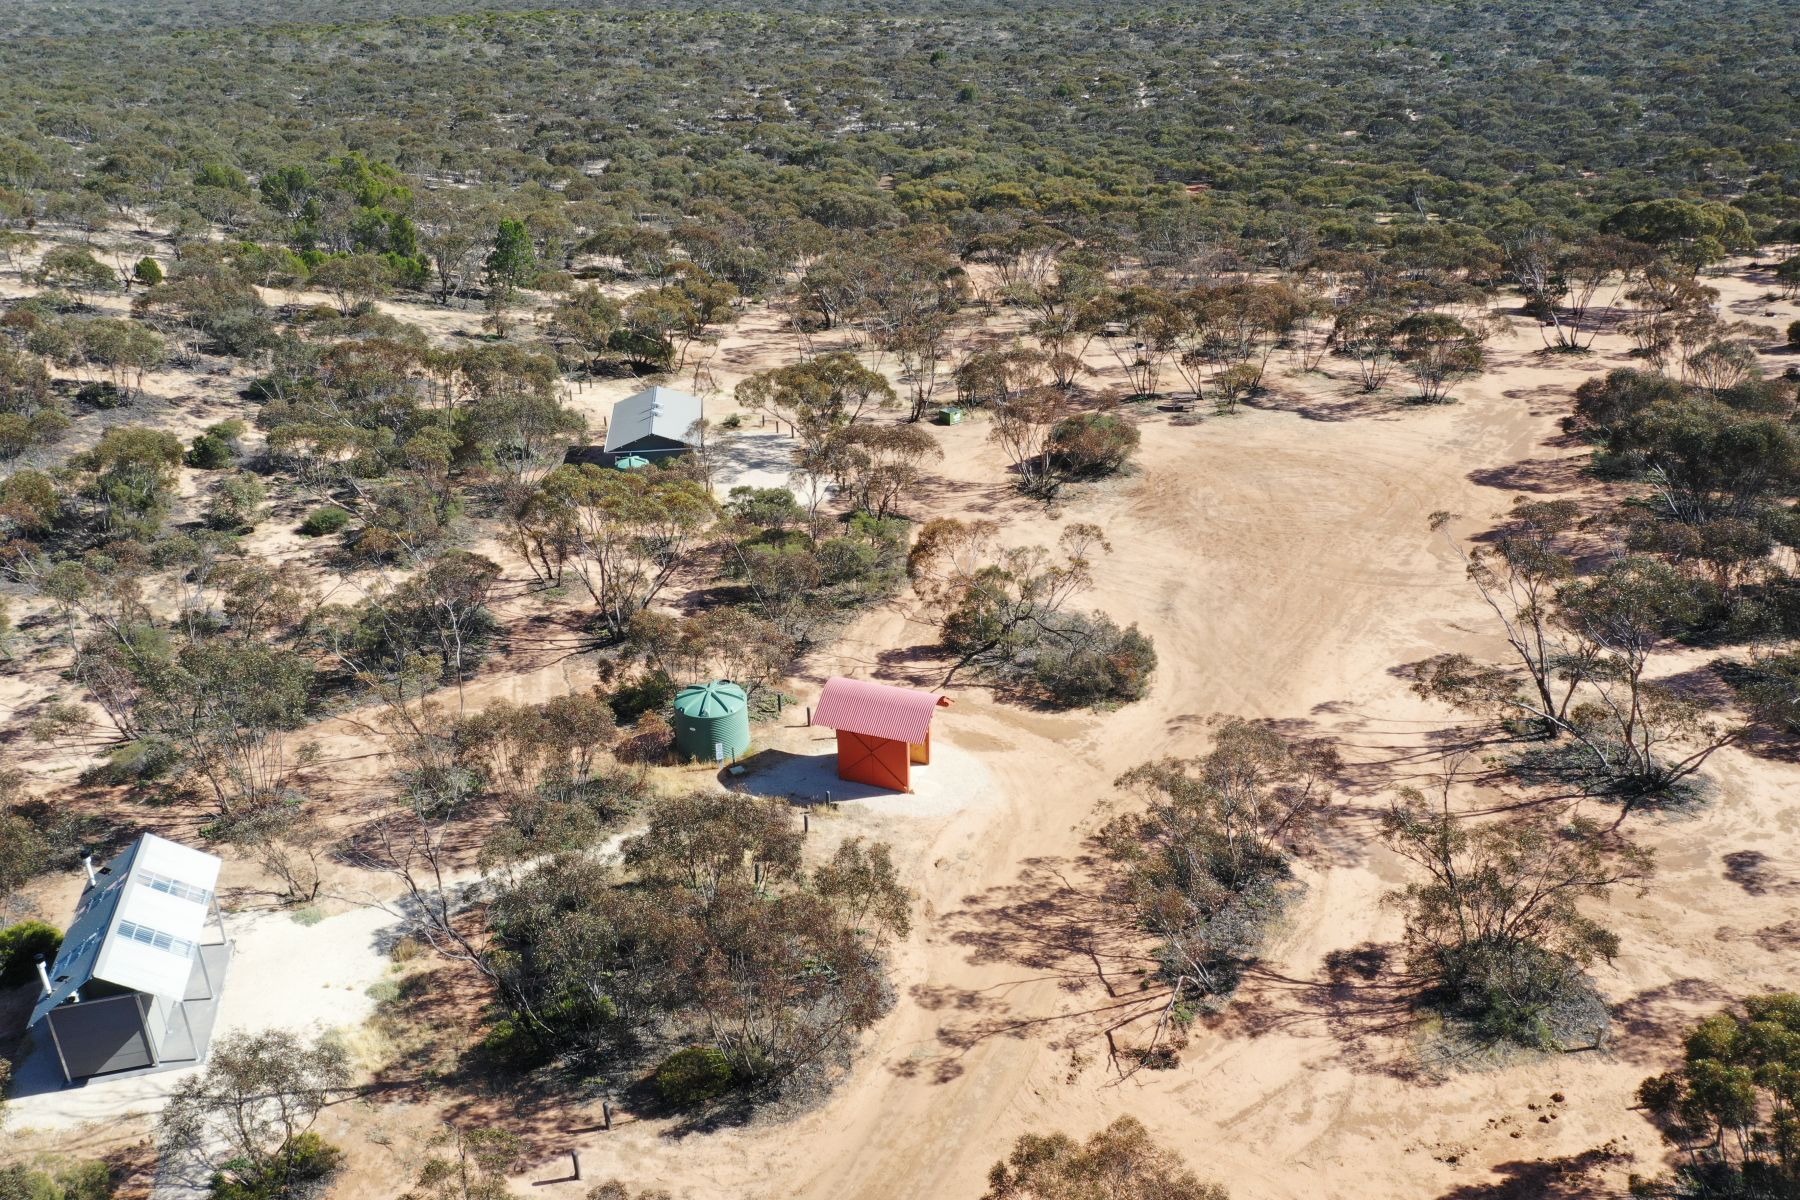 A campground in the desert